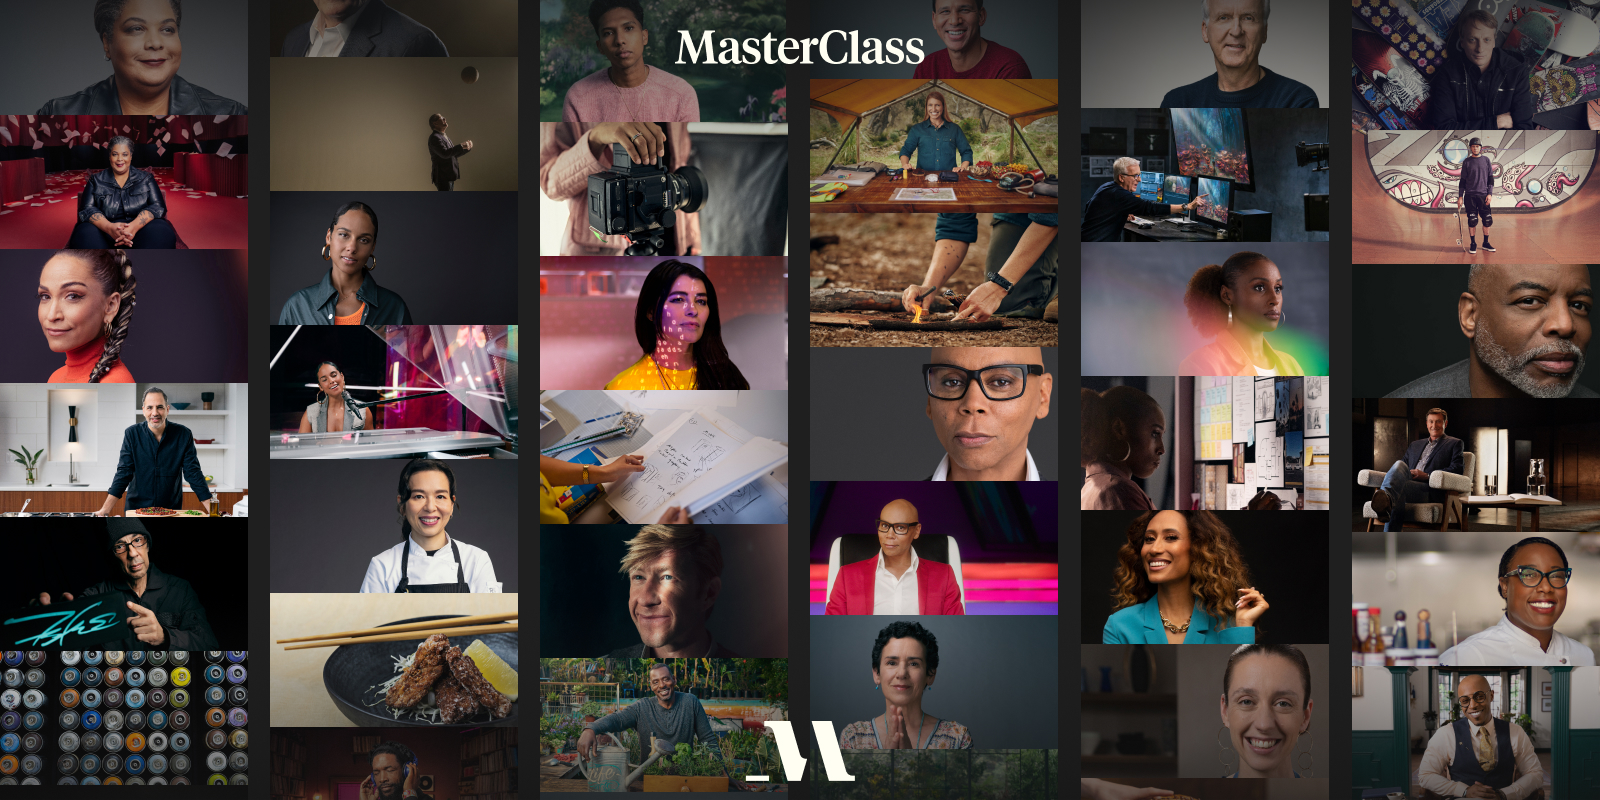 MasterClass Free Trial: Get a 30-day money-back guarantee